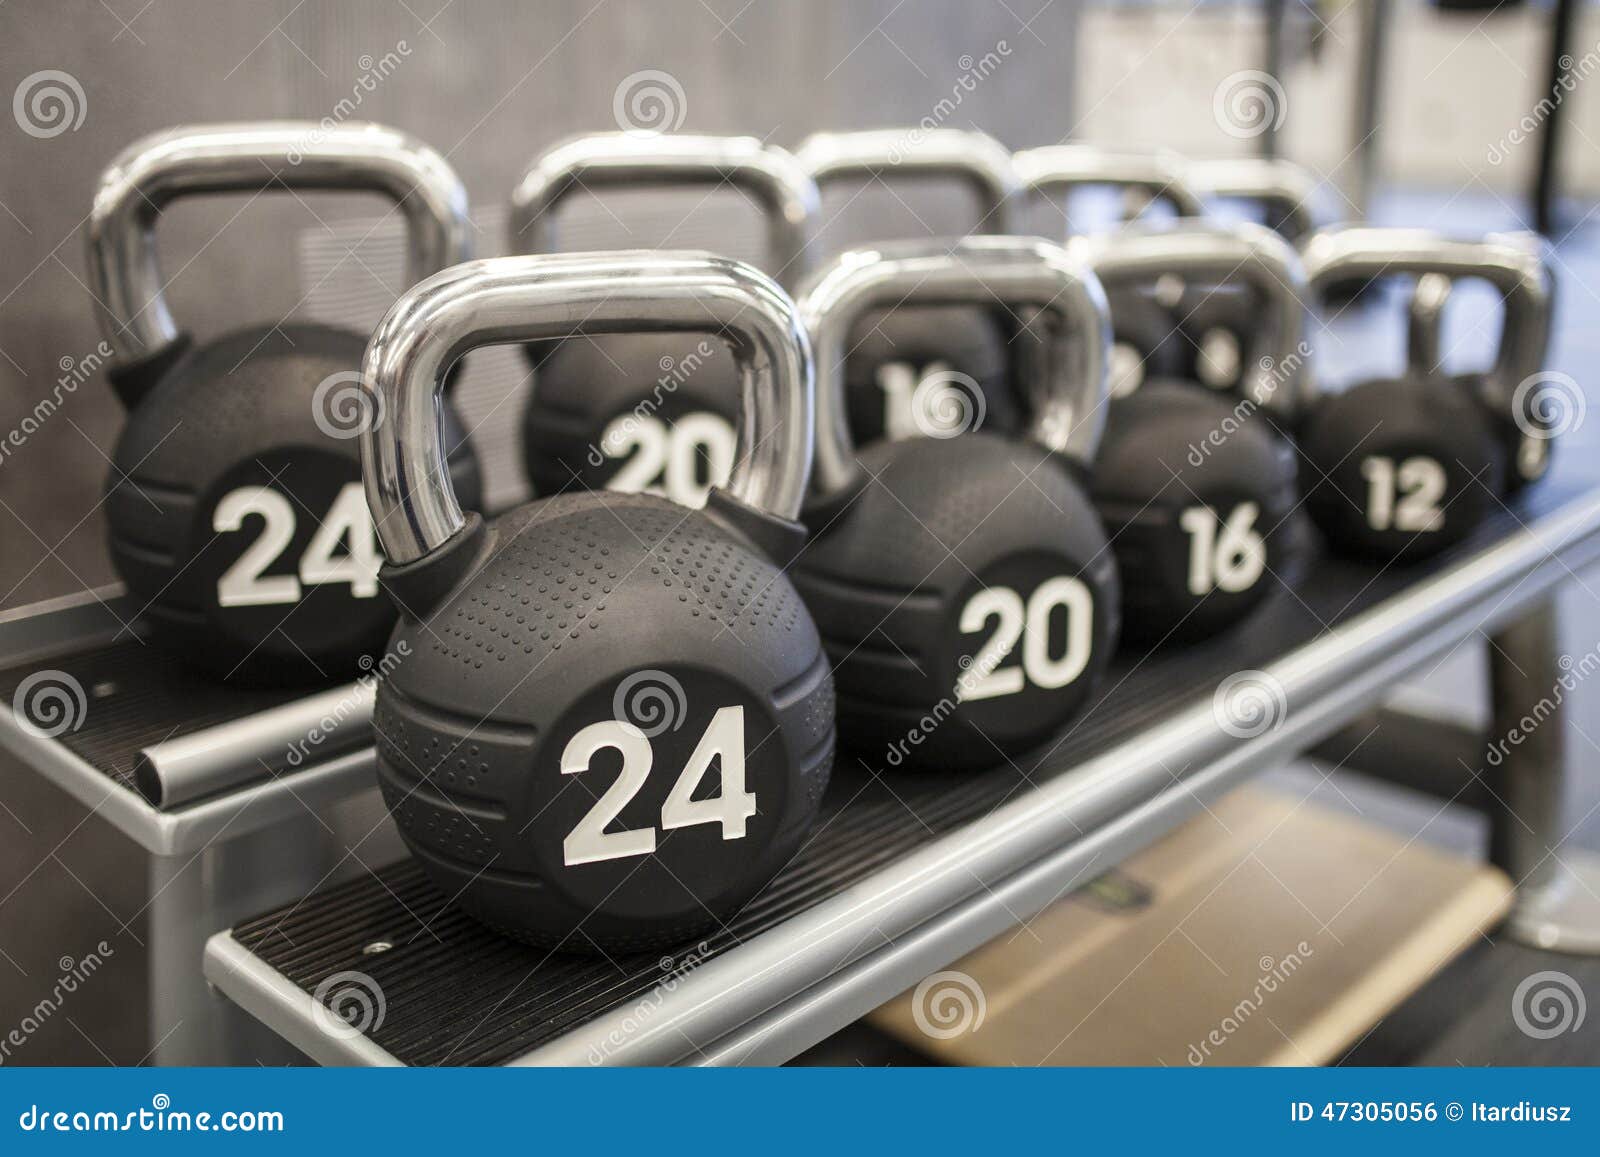 heavy kettlebells weights in a workout gym